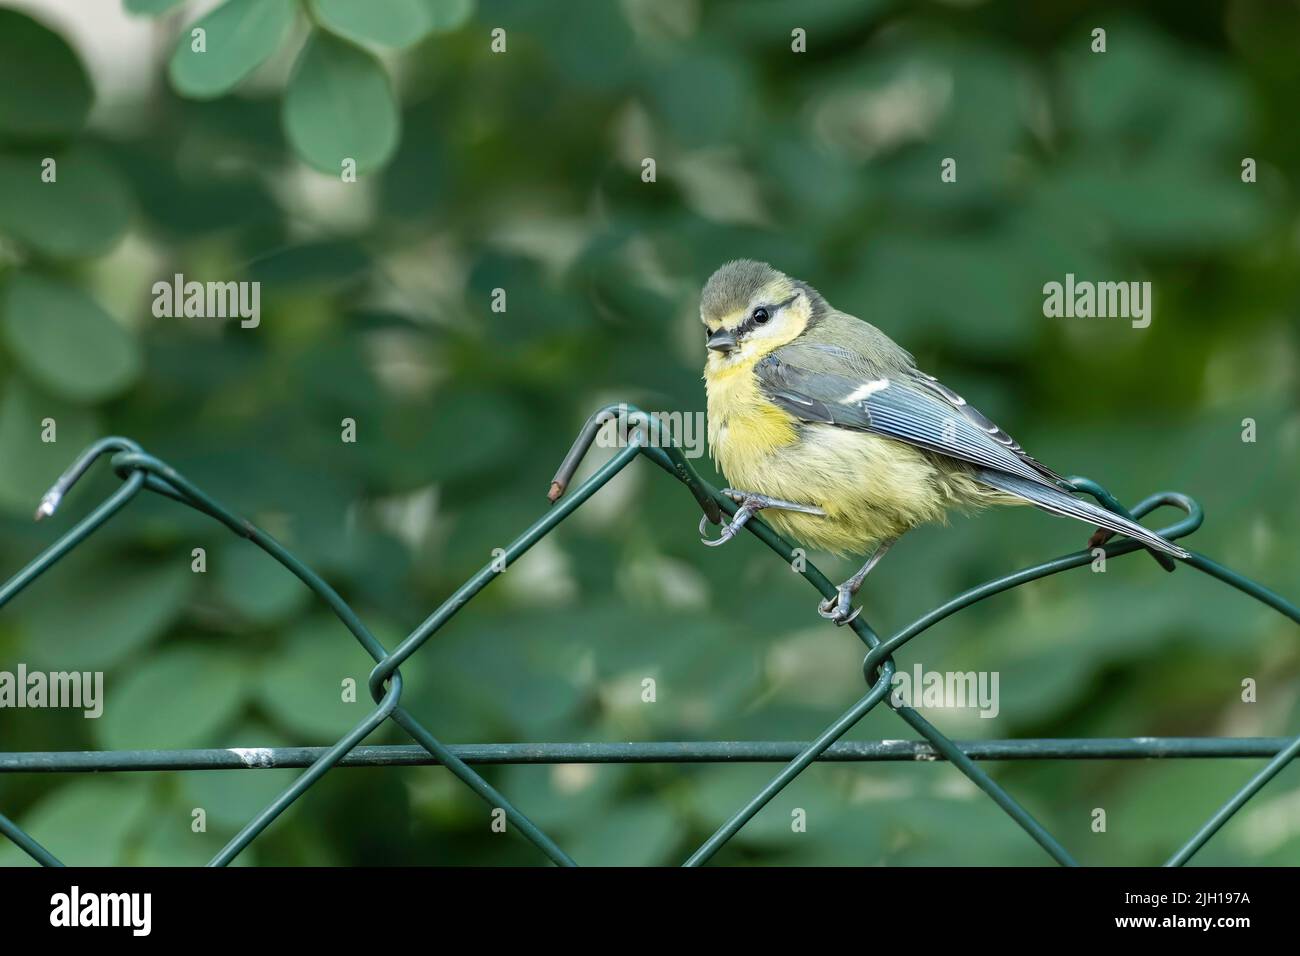 A young blue tit on a fence Stock Photo